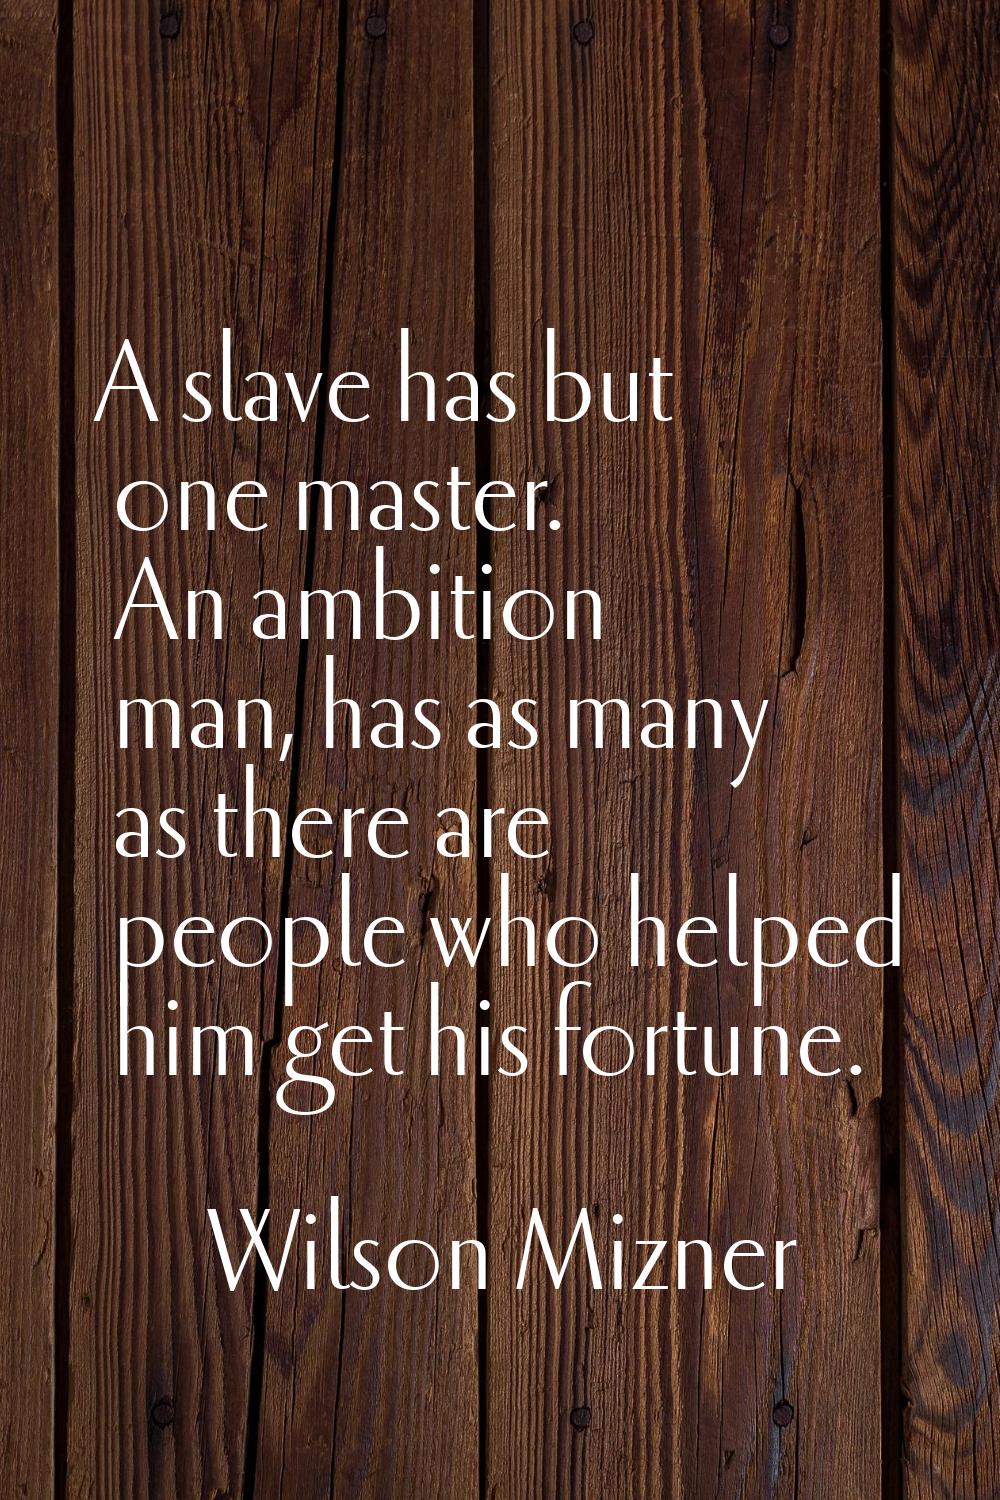 A slave has but one master. An ambition man, has as many as there are people who helped him get his